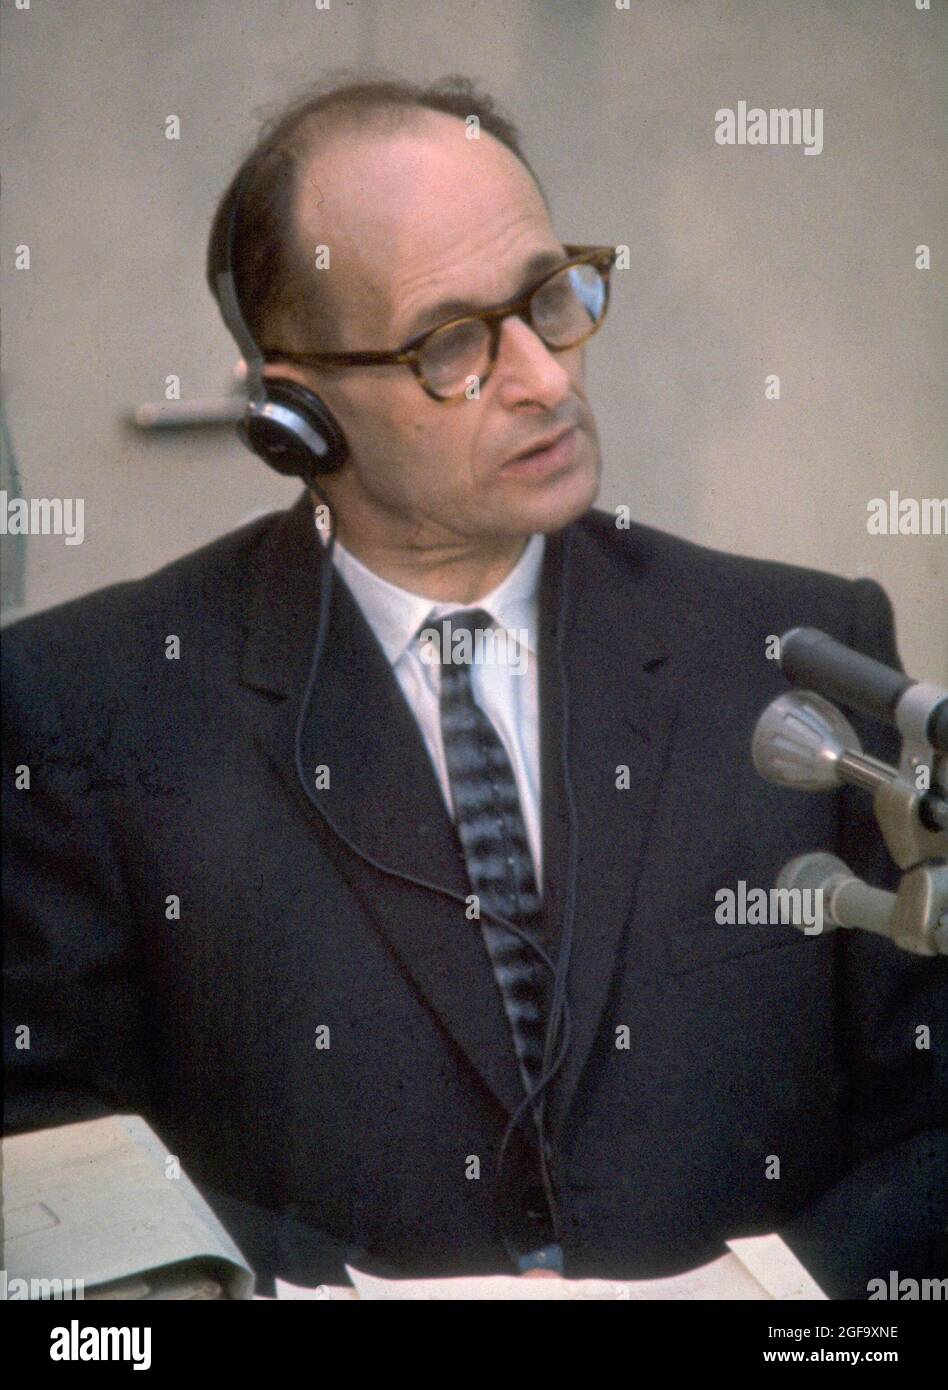 The nazi leader and politician Adolf Eichmann on trial in Isreal. His skill in logistics made him one of the main organisers of the Holocaust. He escaped from Germany in 1950 and went to Argentina where he was captured by Israeli agents. He was tried and sentenced to death in Israel in 1962 Stock Photo